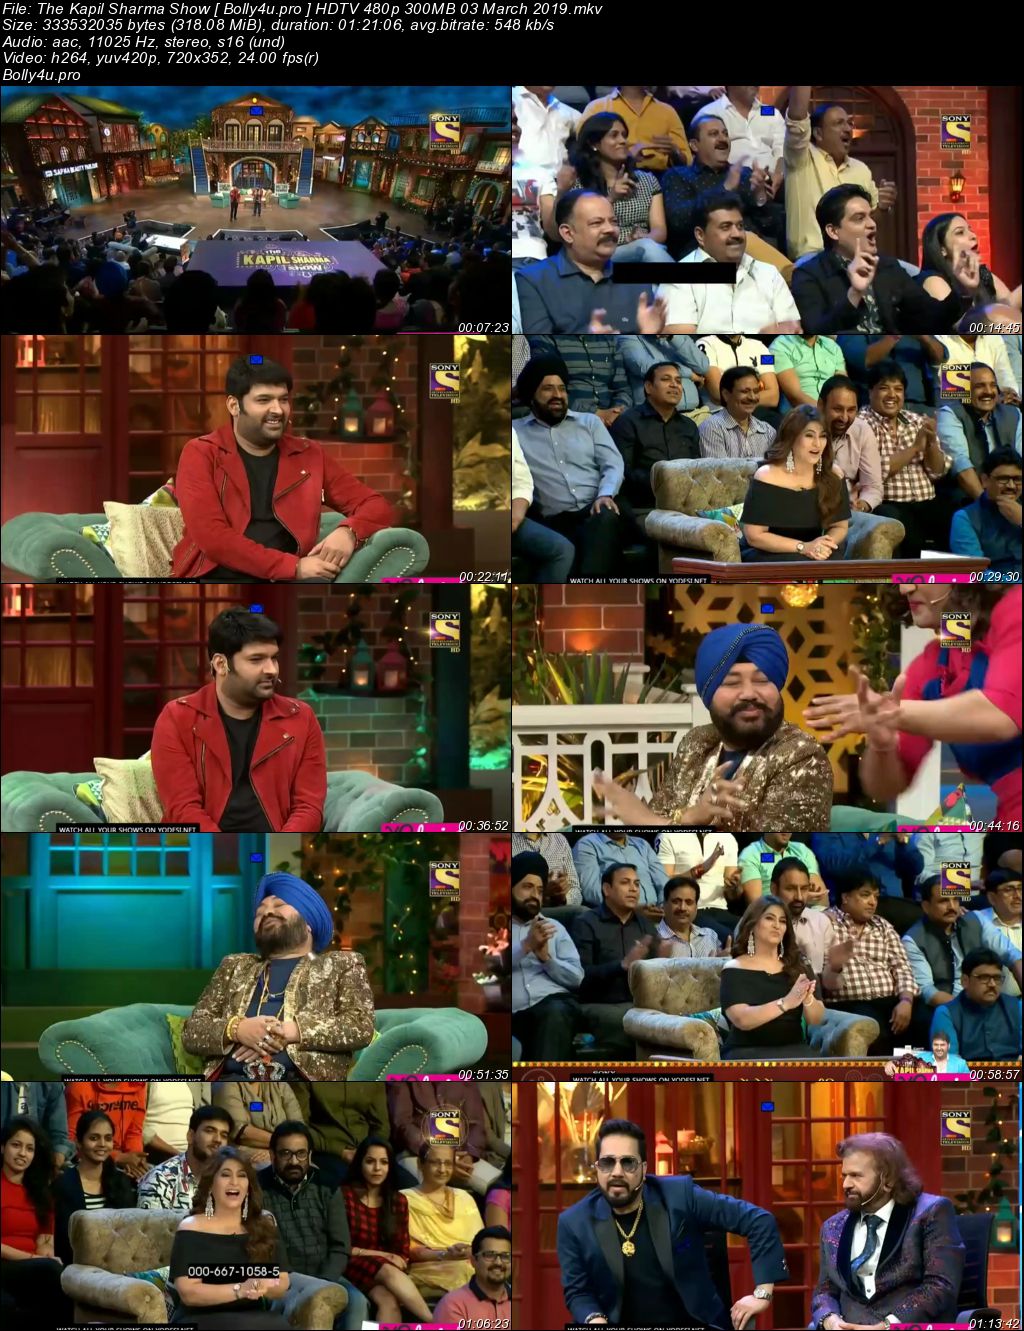 The Kapil Sharma Show HDTV 480p 300MB 03 March 2019 Download